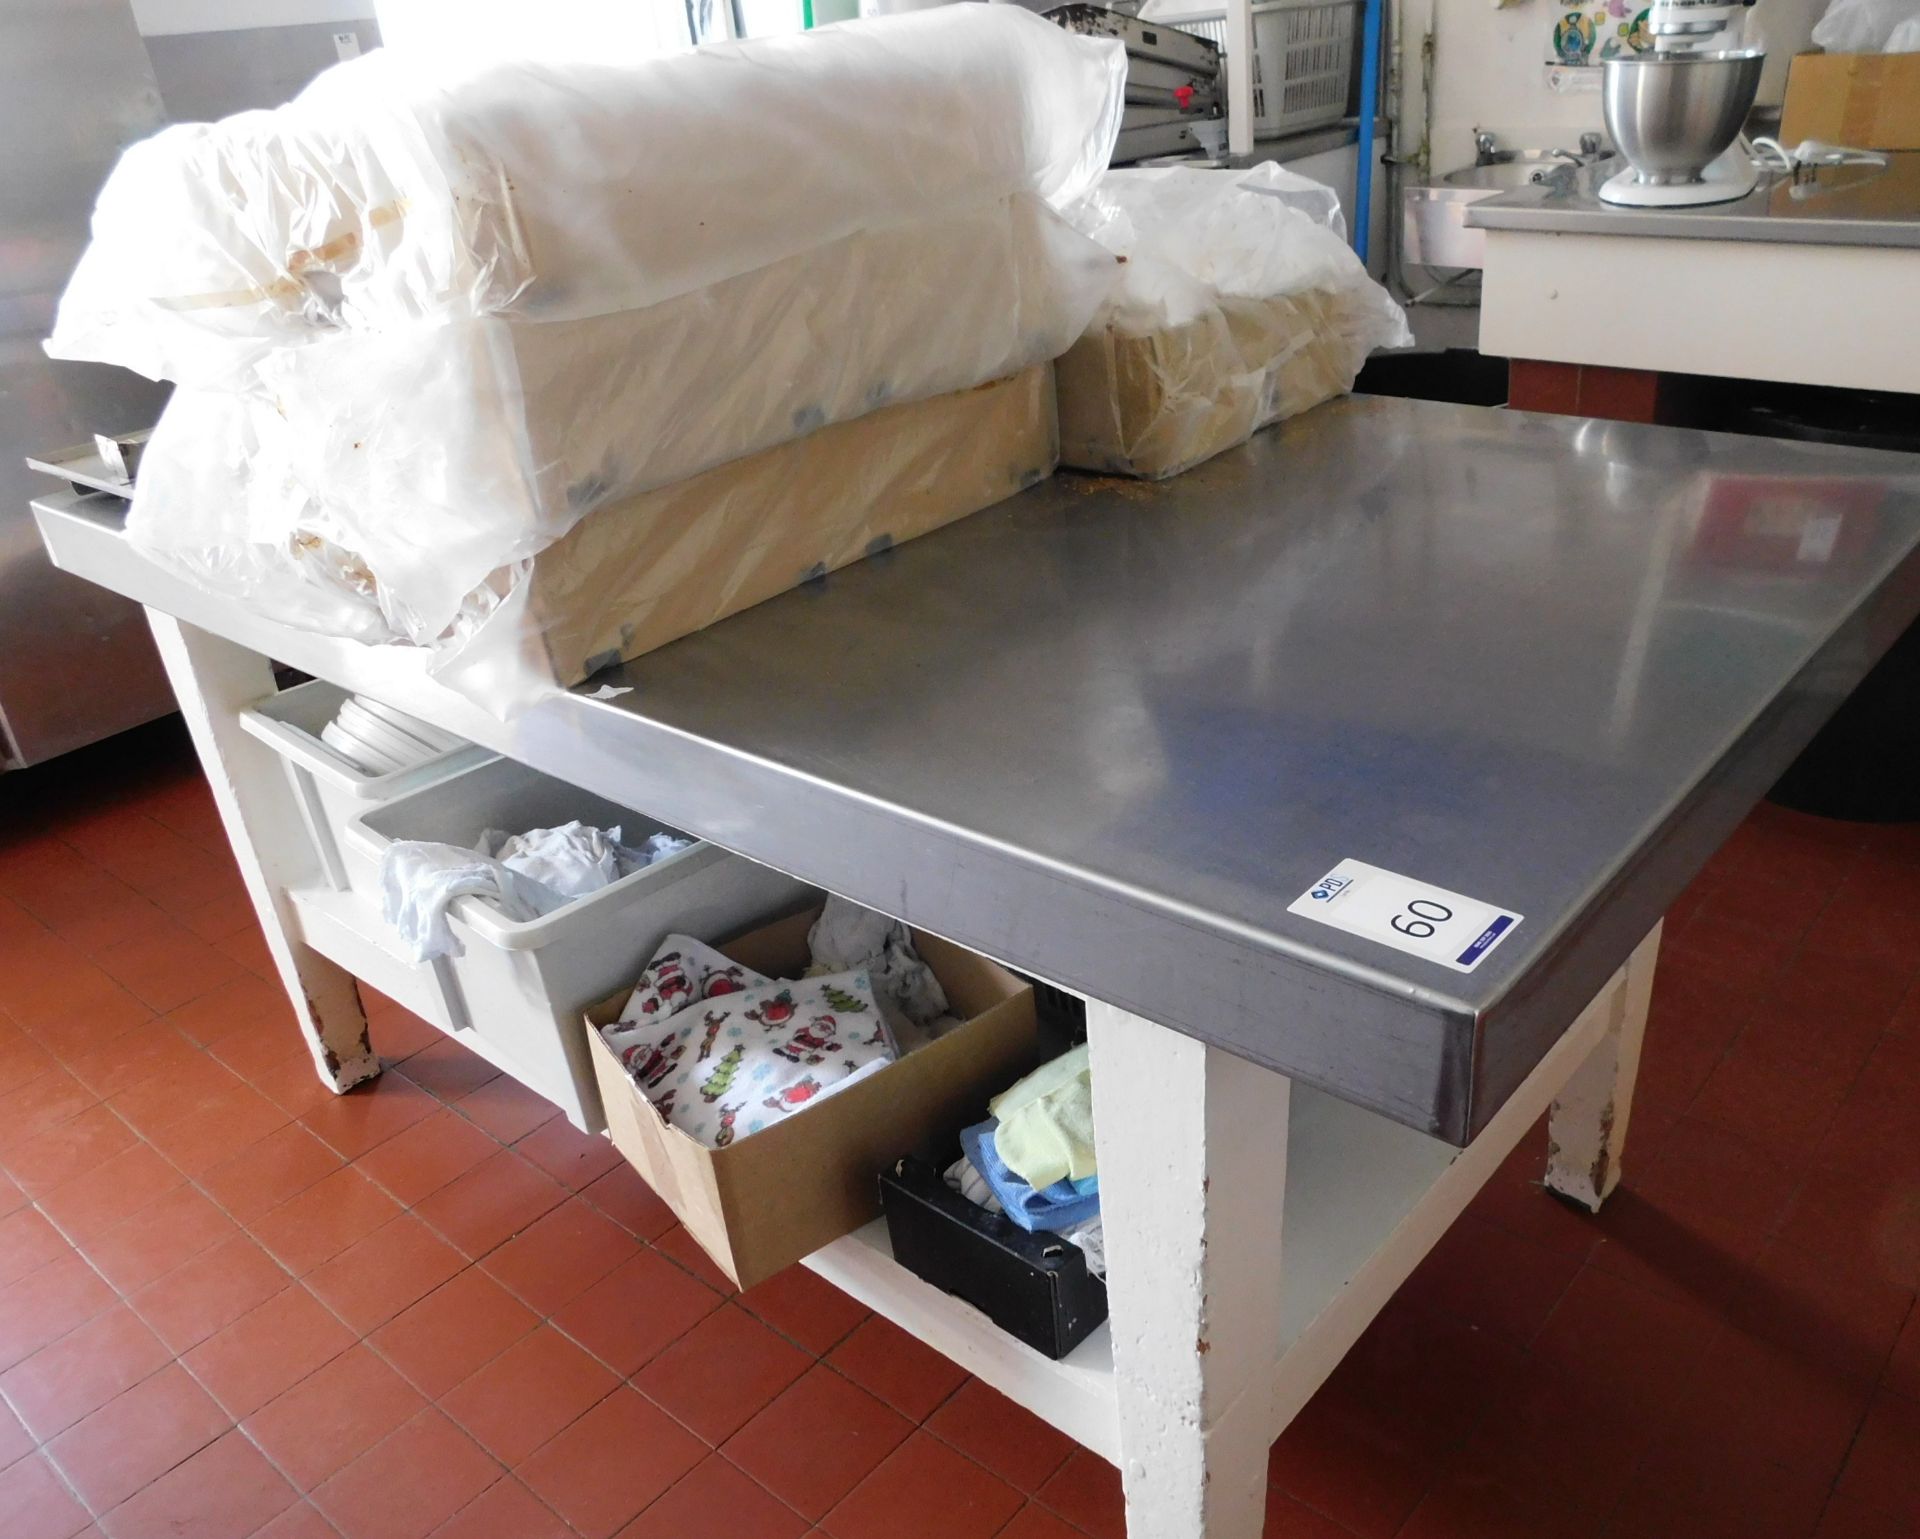 Stainless Steel Topped Wooden Island Preparation Table with Contents (Top - 180cm W x 98.5cm D